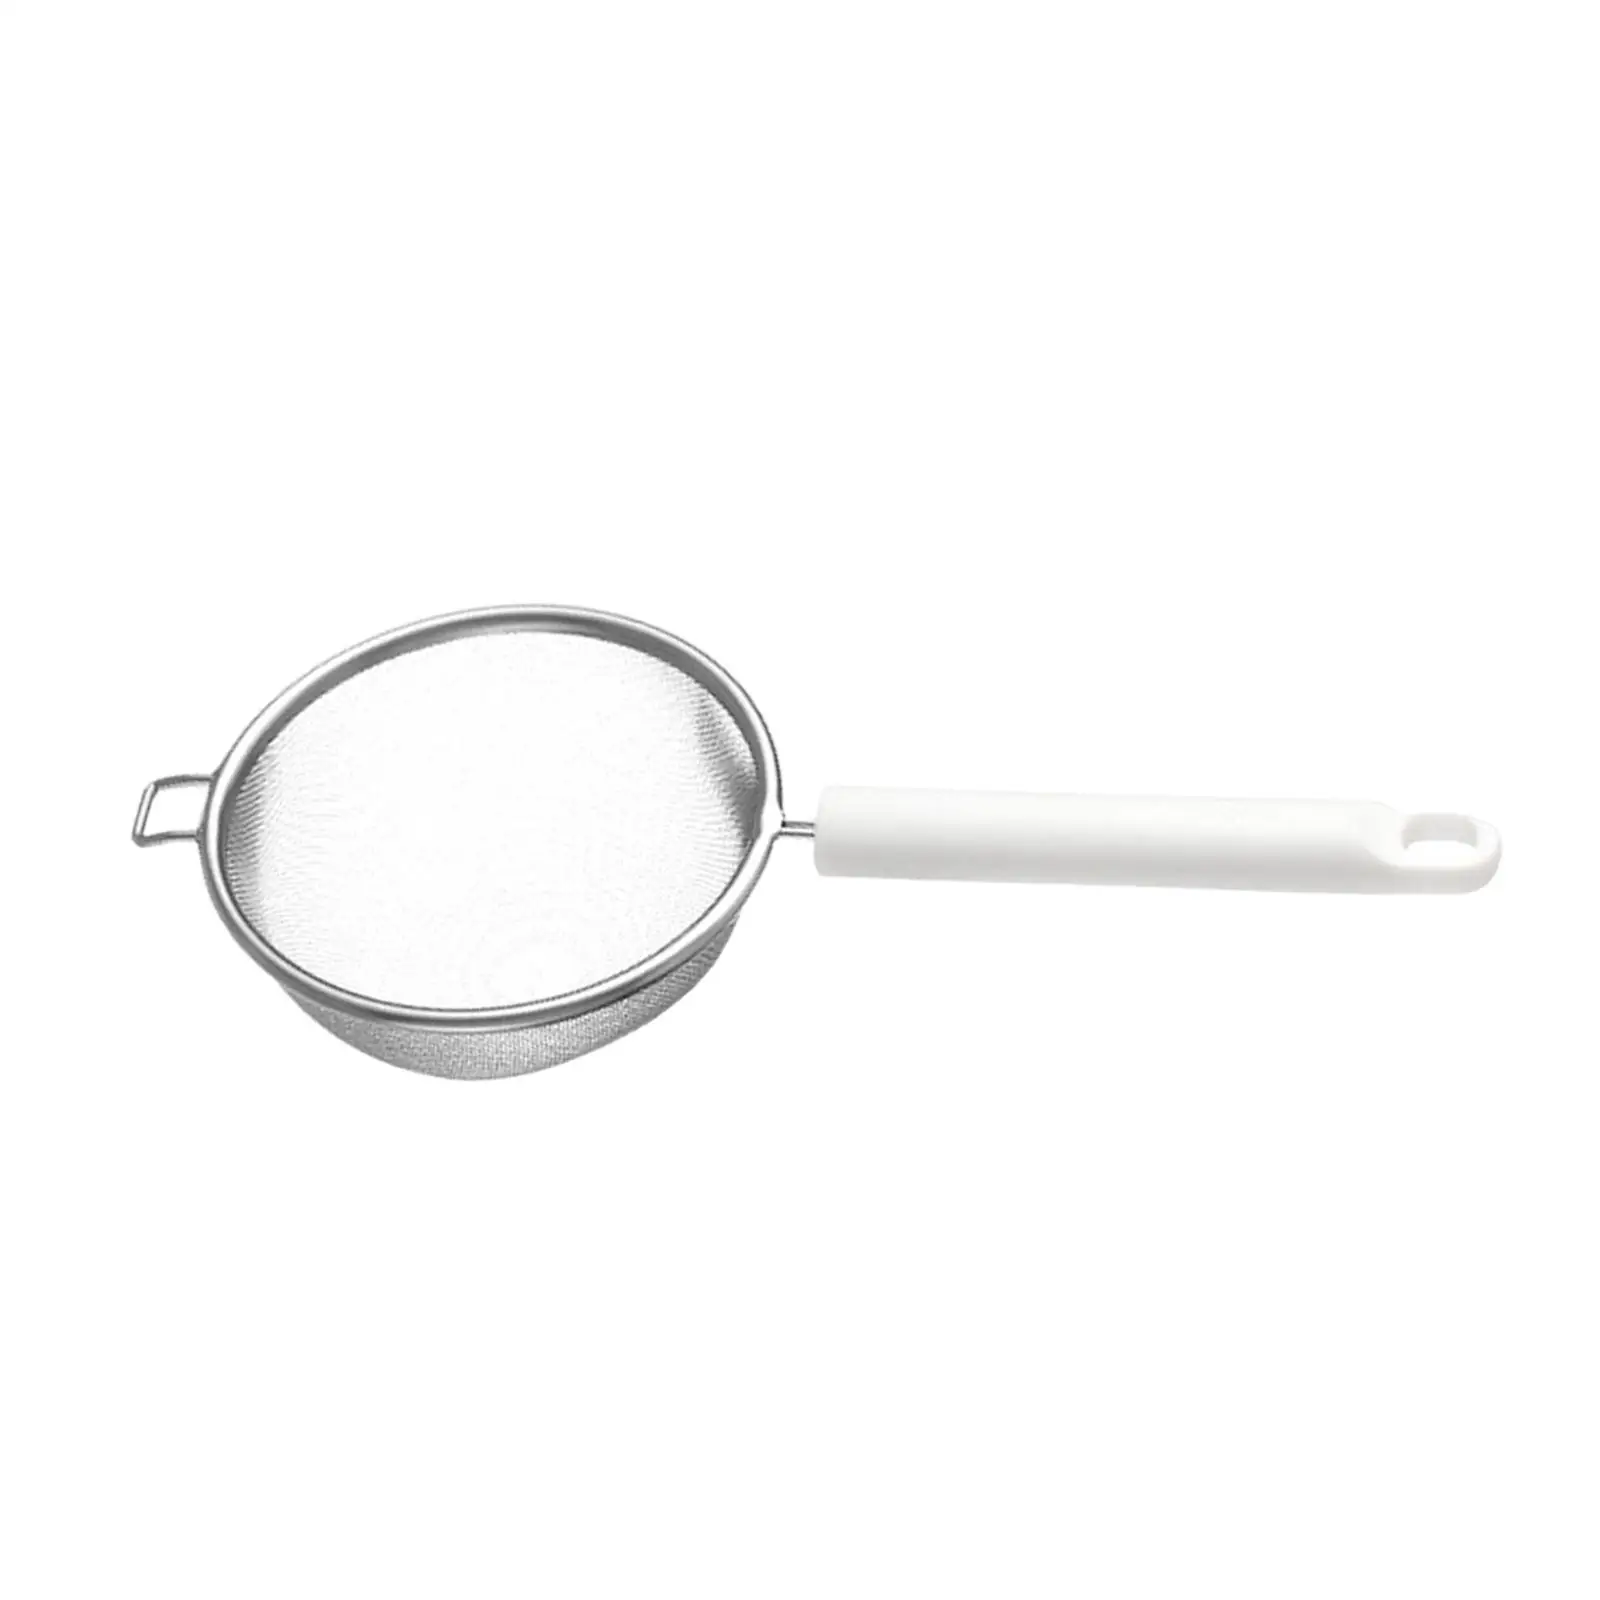 Fine Mesh Strainers Stainless Steel Small essentials Filter Spoon for Sifting Tea